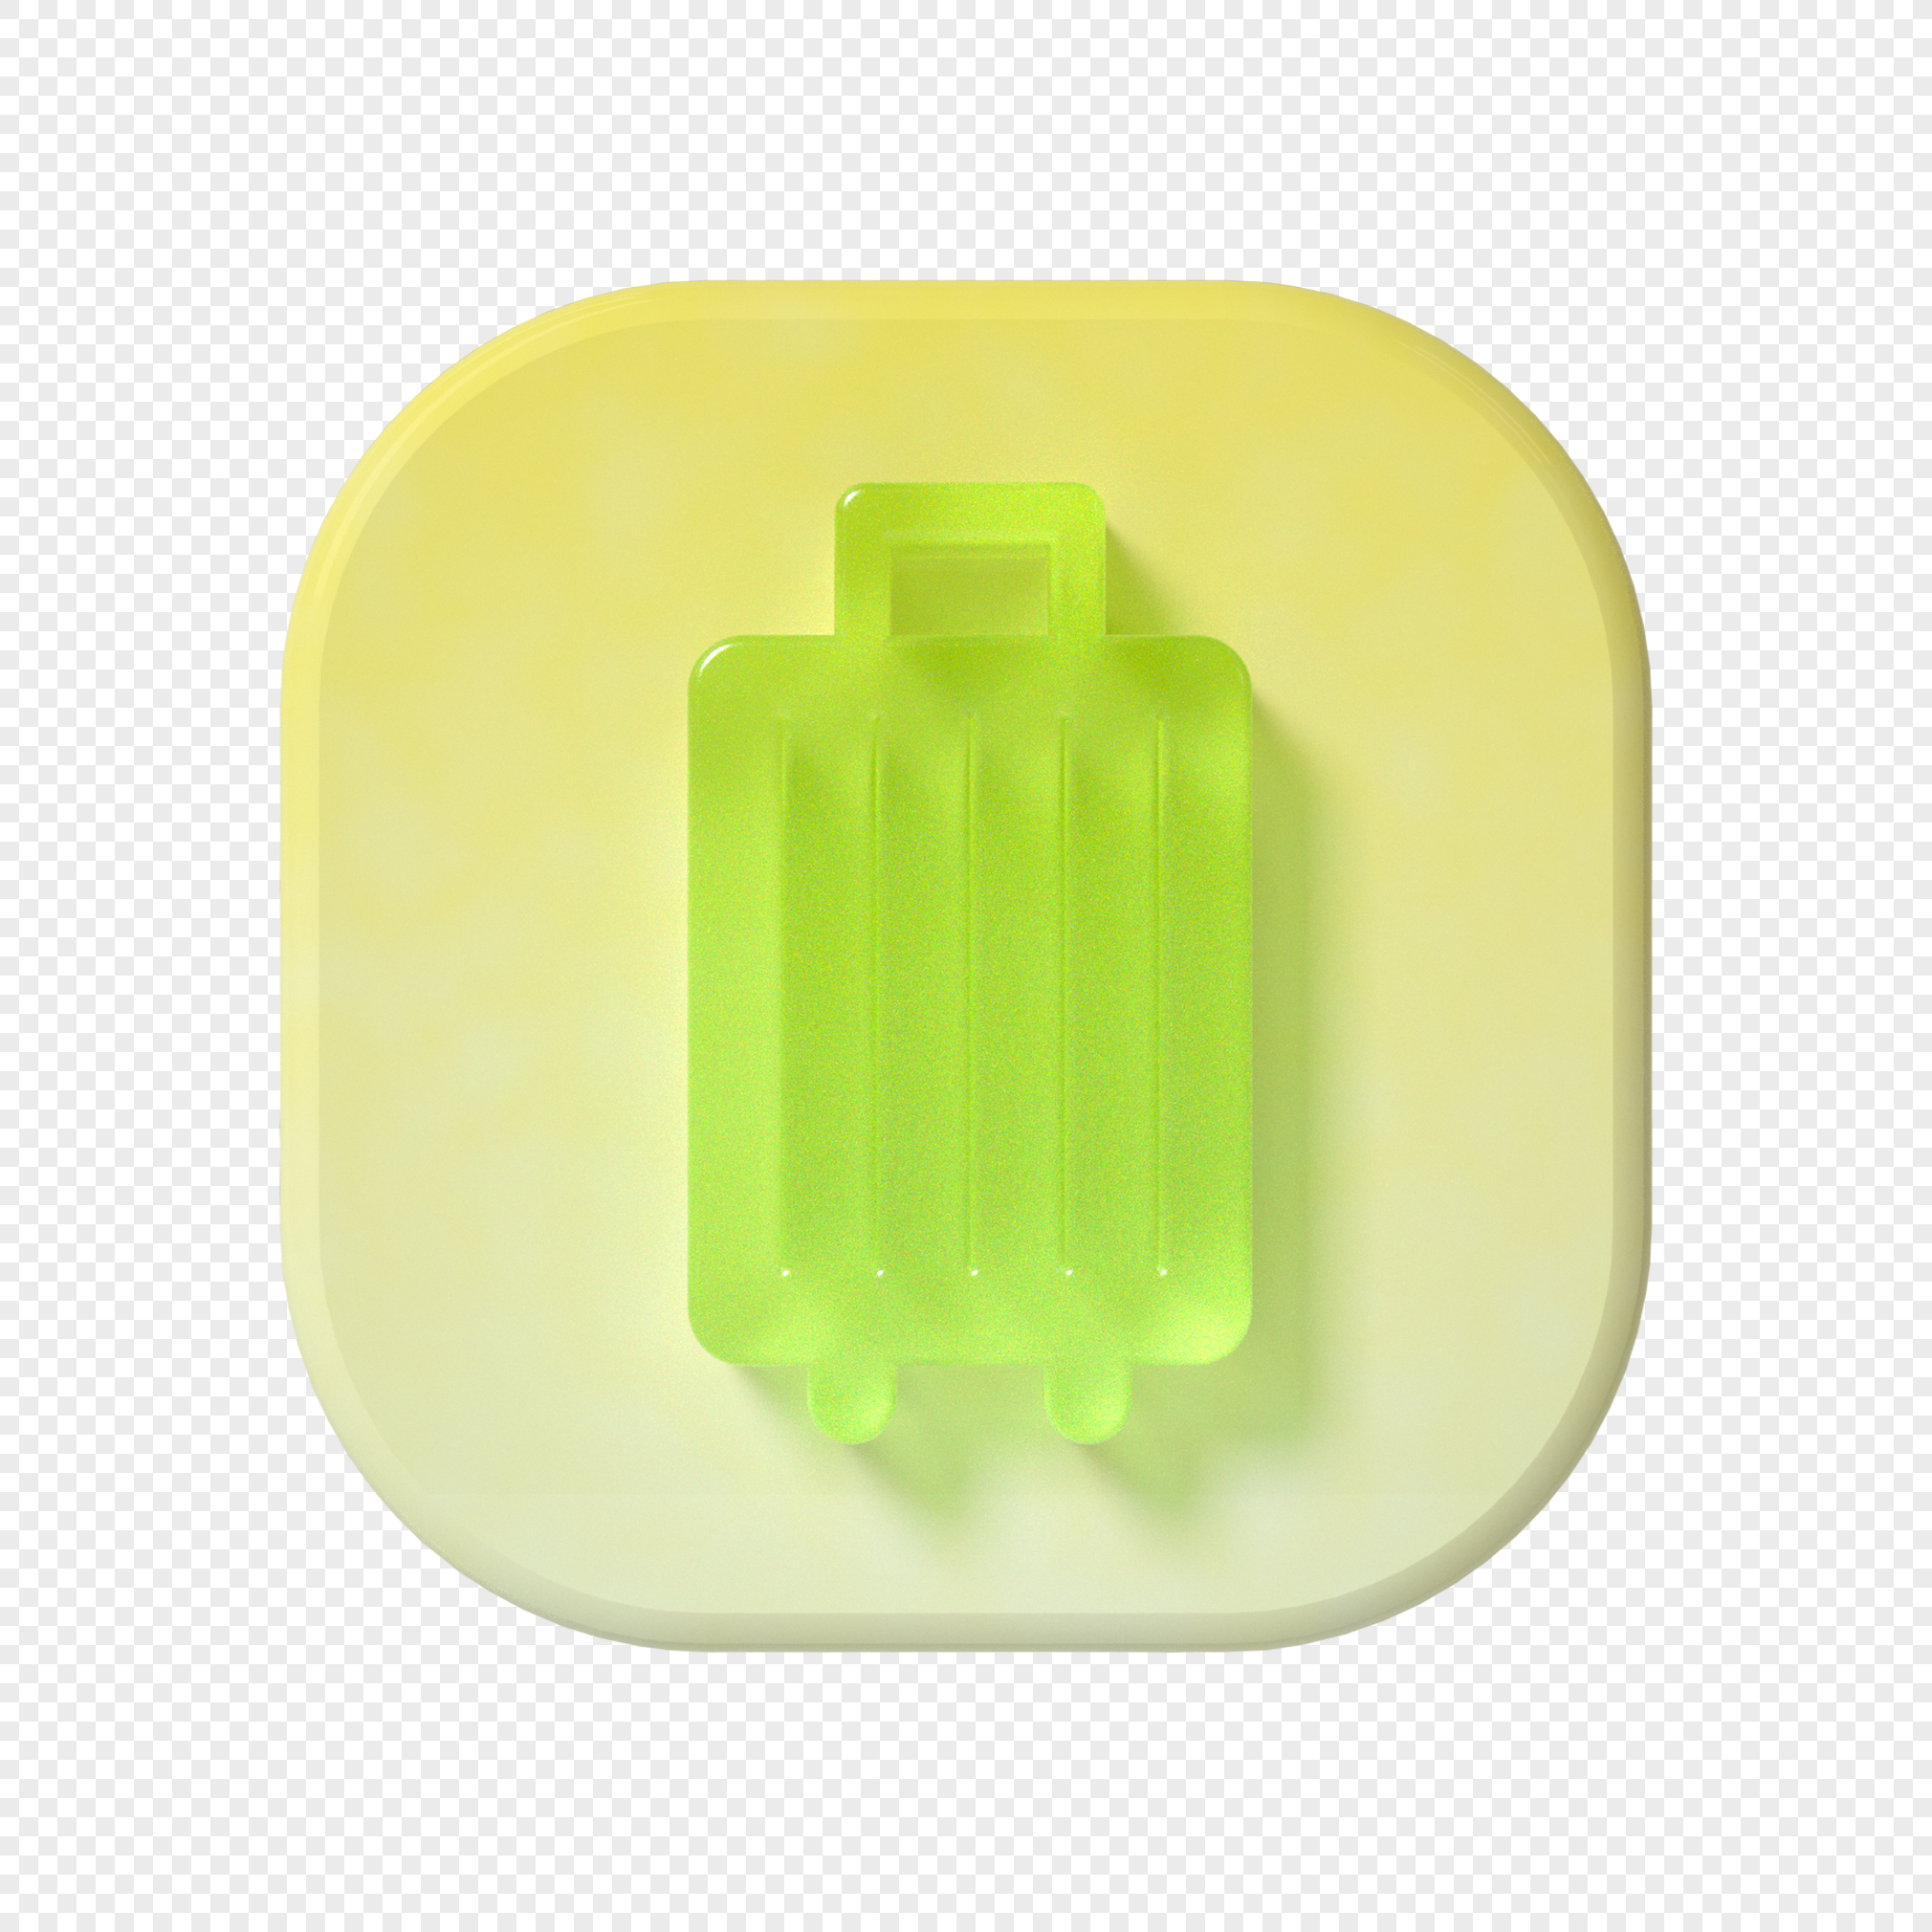 3D travel series icon luggage box, glasses icon, 3d travel, icon png white transparent